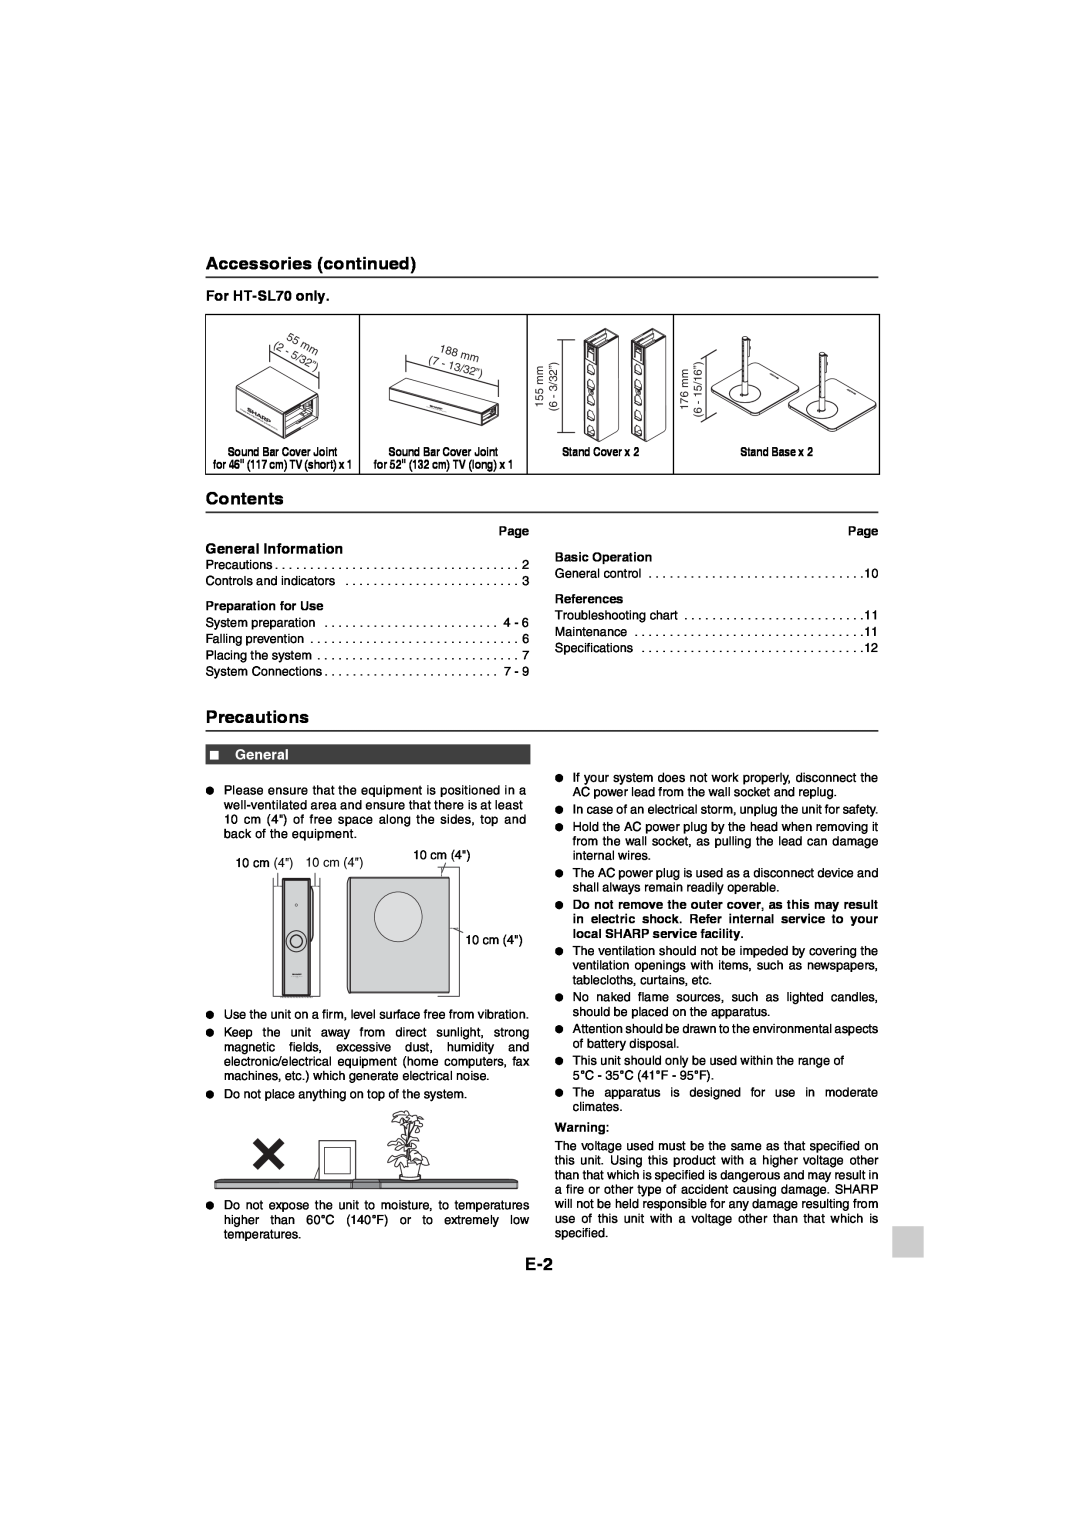 Sharp HT-SL75 operation manual Accessories continued, Contents, Precautions, For HT-SL70only, General Information 